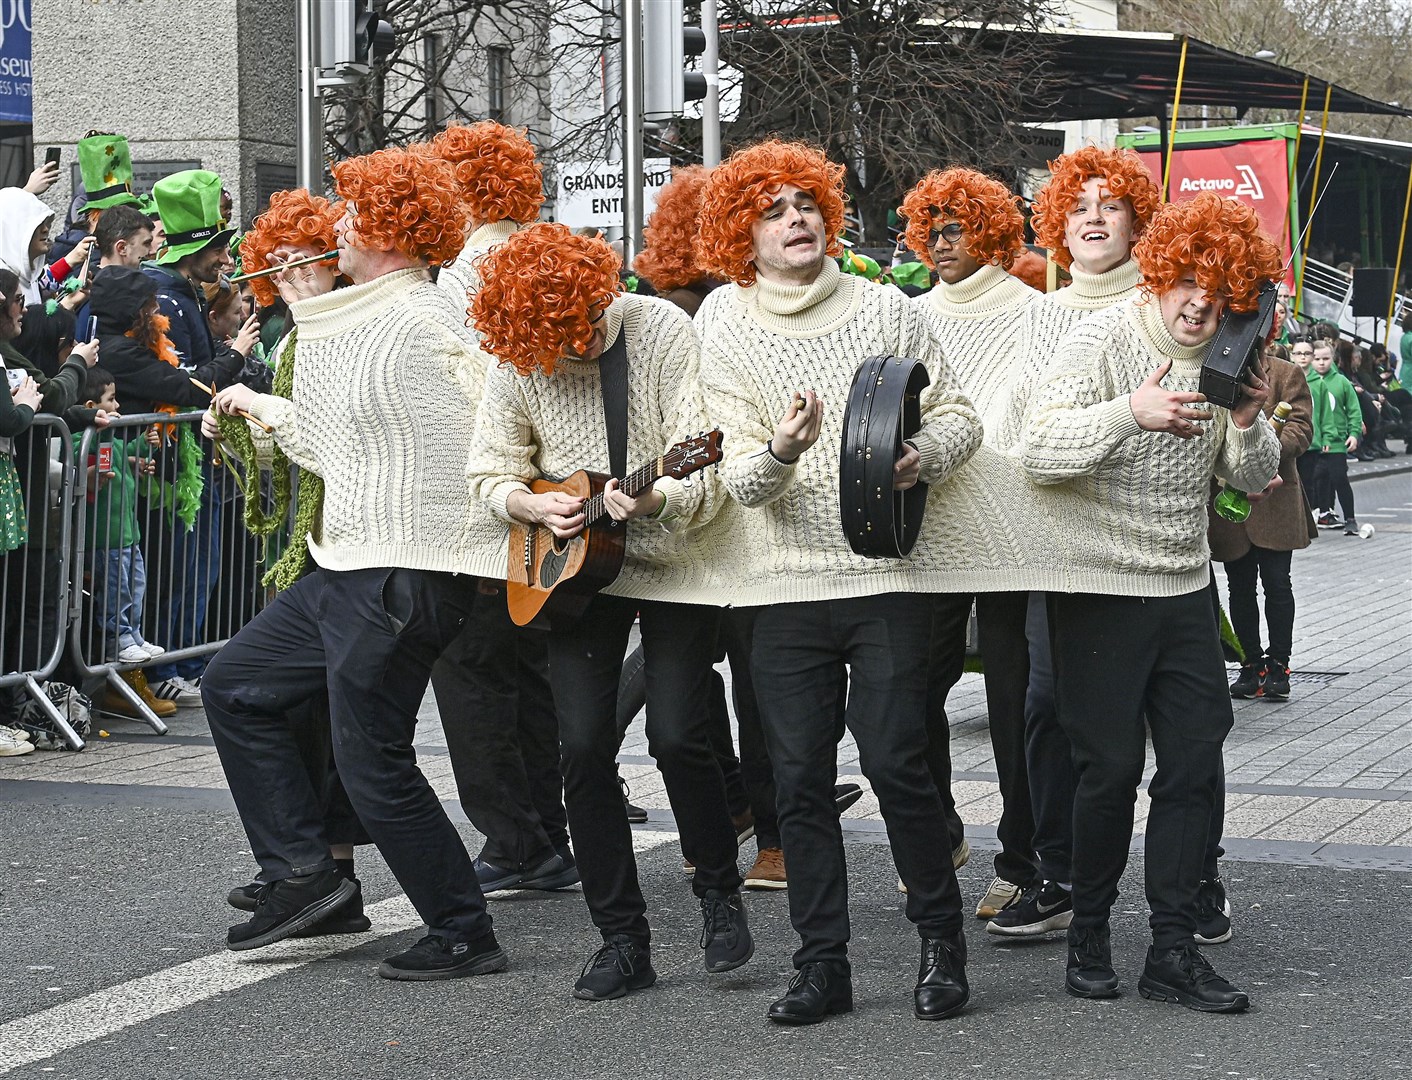 A ‘110% Irish’ performance as part of the St Patrick’s Day parade in Dublin (Michael Chester/PA)